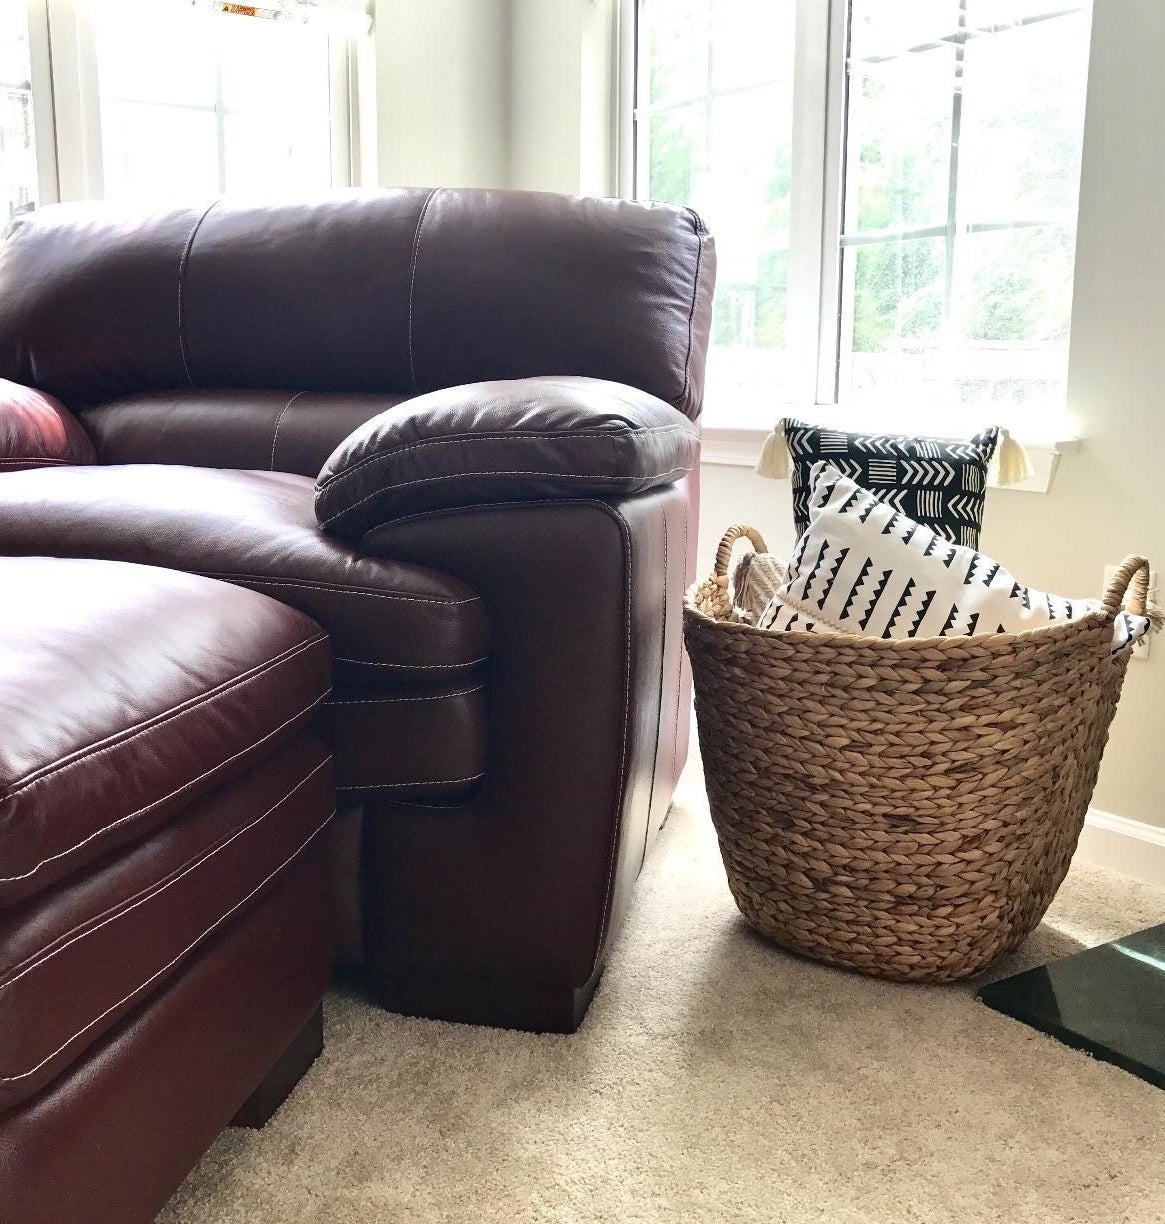 reviewer pic of the woven basket in light tan next to a chair with pillows inside of it